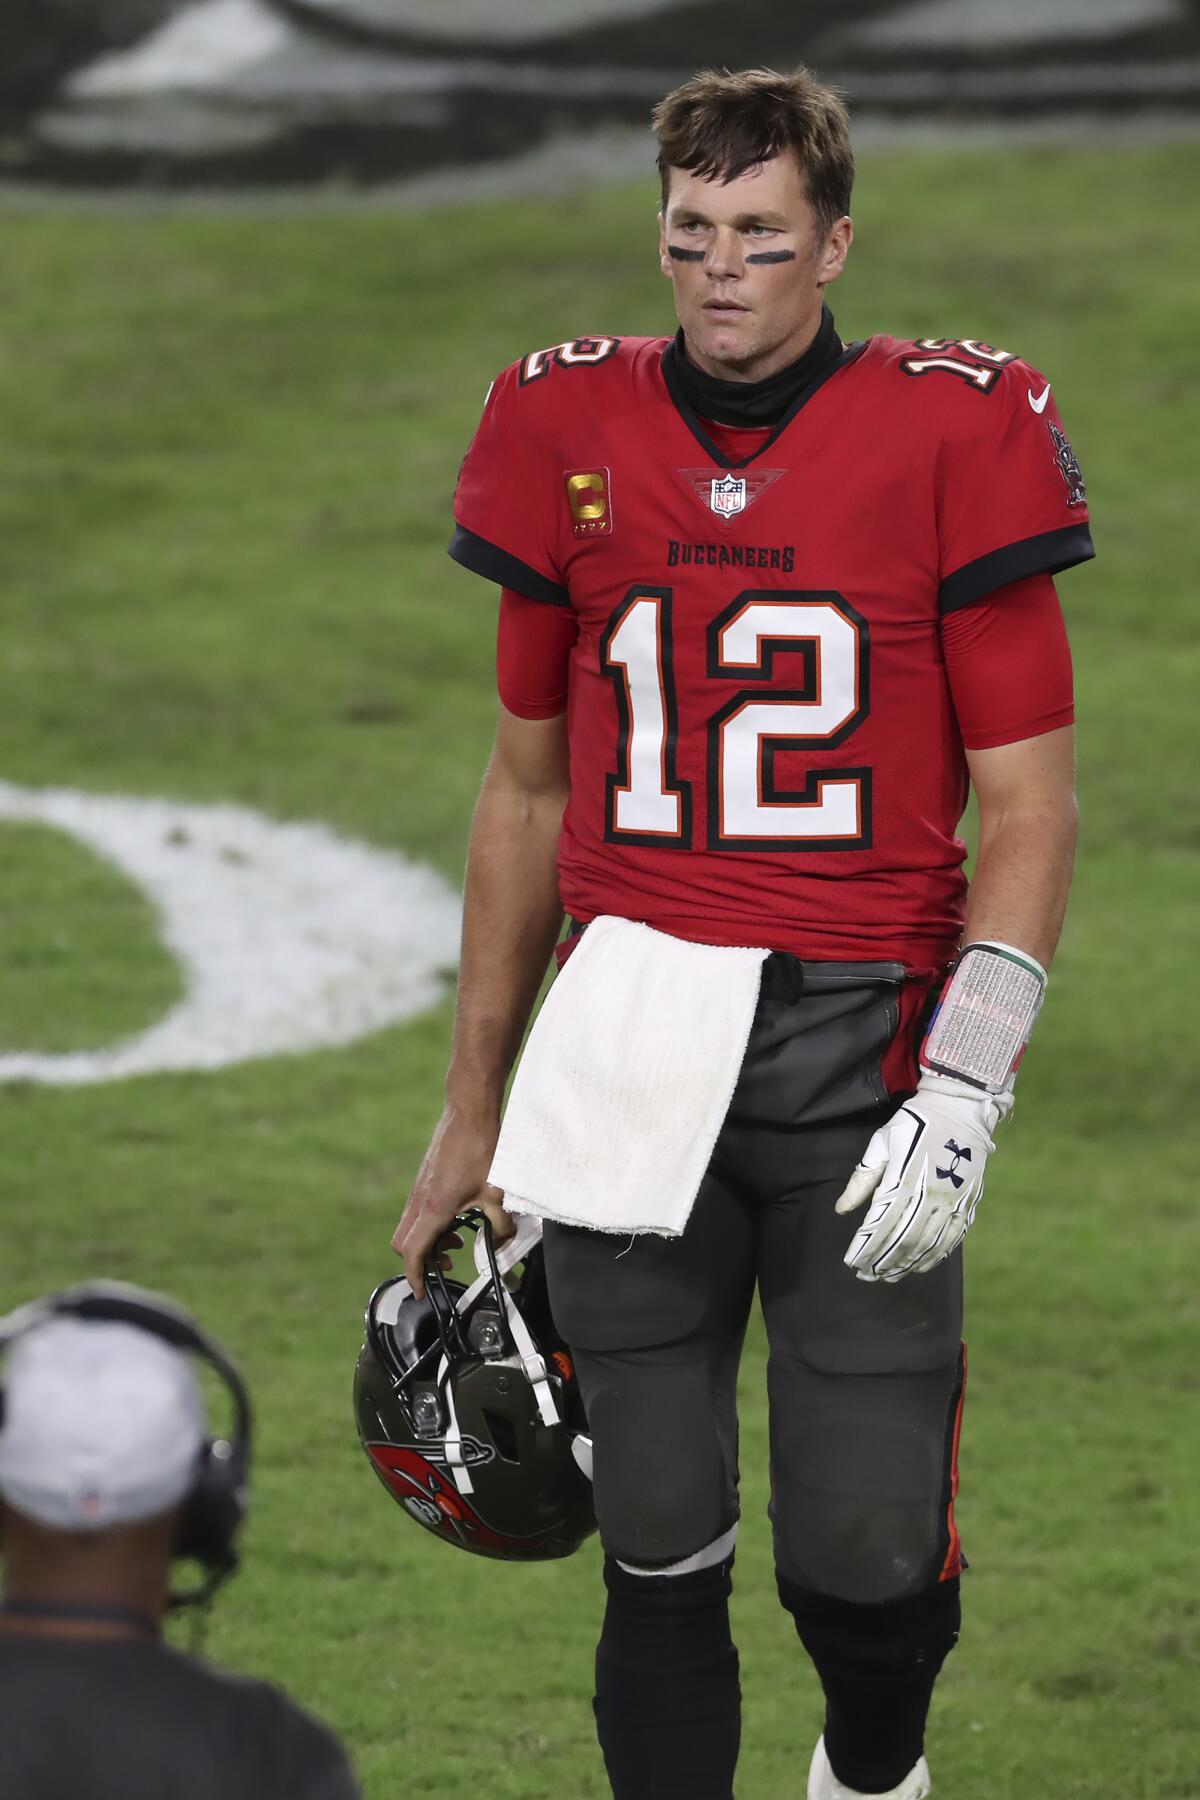 Tampa Bay Buccaneers QB Tom Brady back with team after brief absence